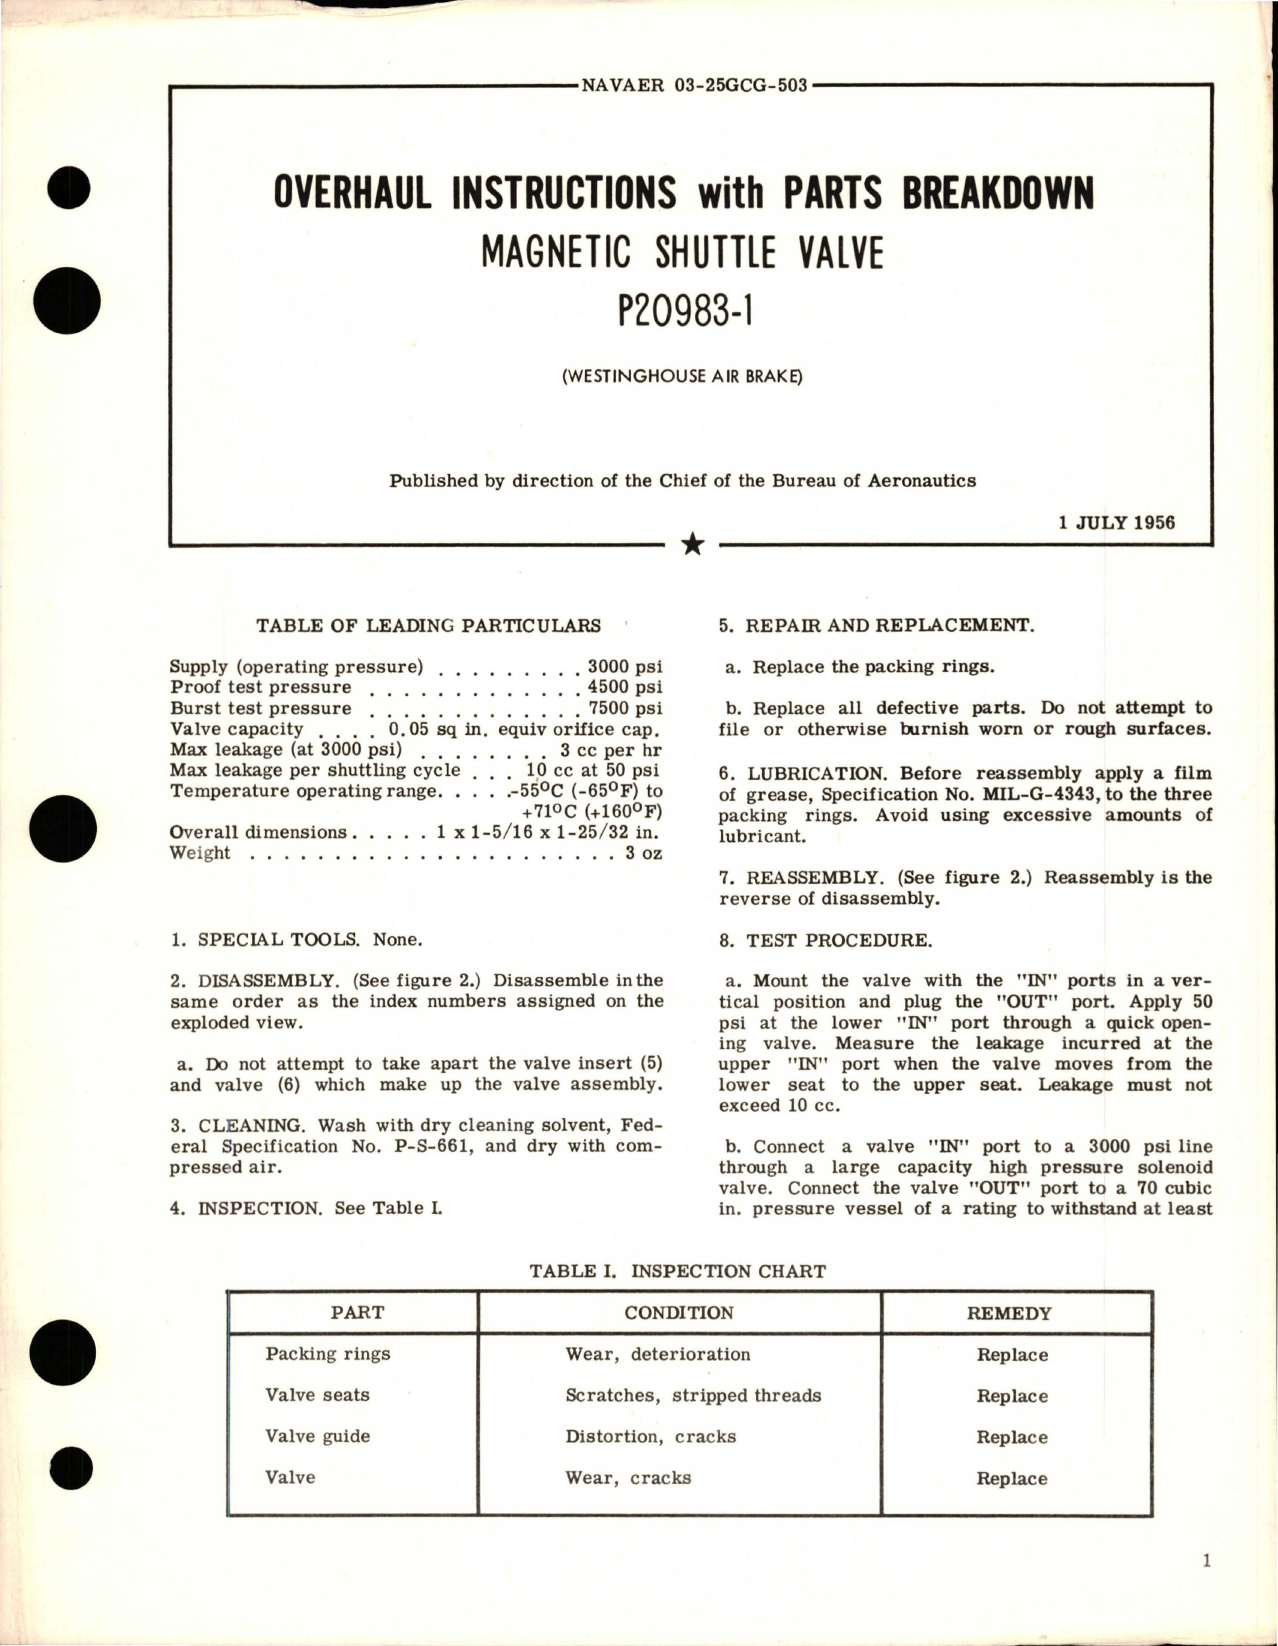 Sample page 1 from AirCorps Library document: Overhaul Instructions with Parts Brreakdown for Magnetic Shuttle Valve - P20983-1